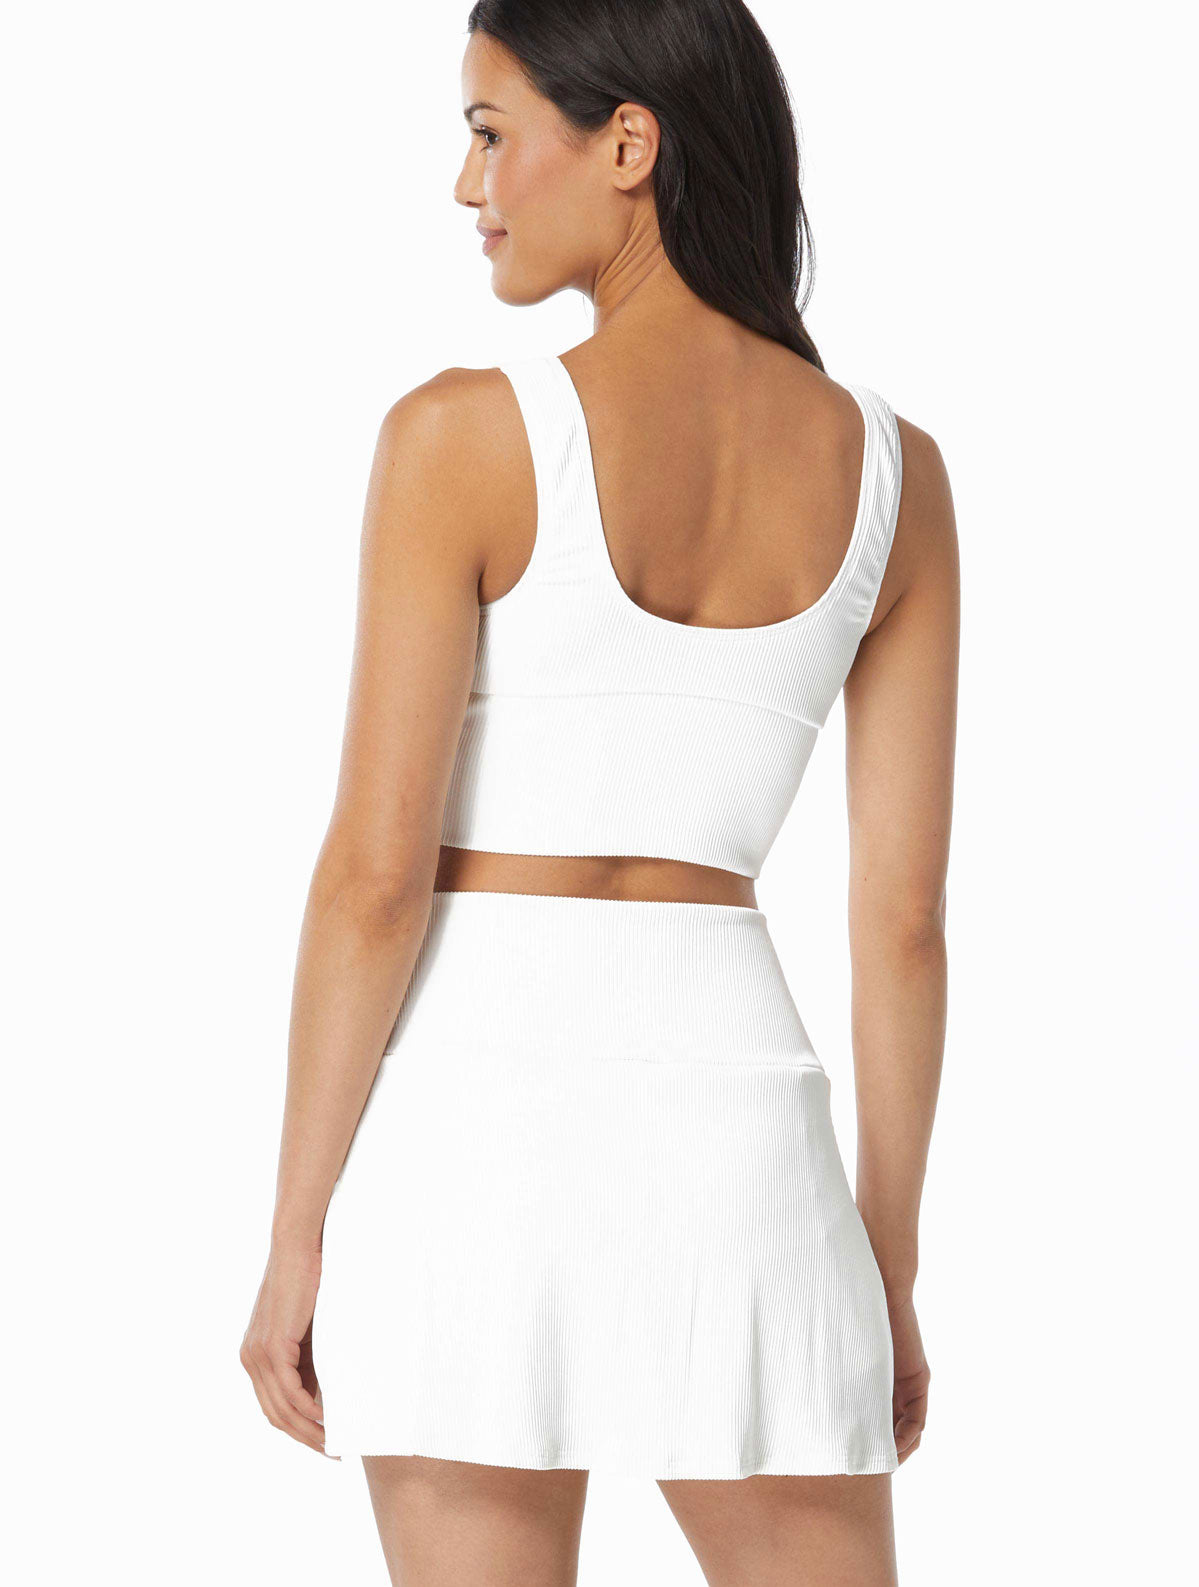 Beach House Sport: Solid Ribbed Bala Crop Top - WHITE